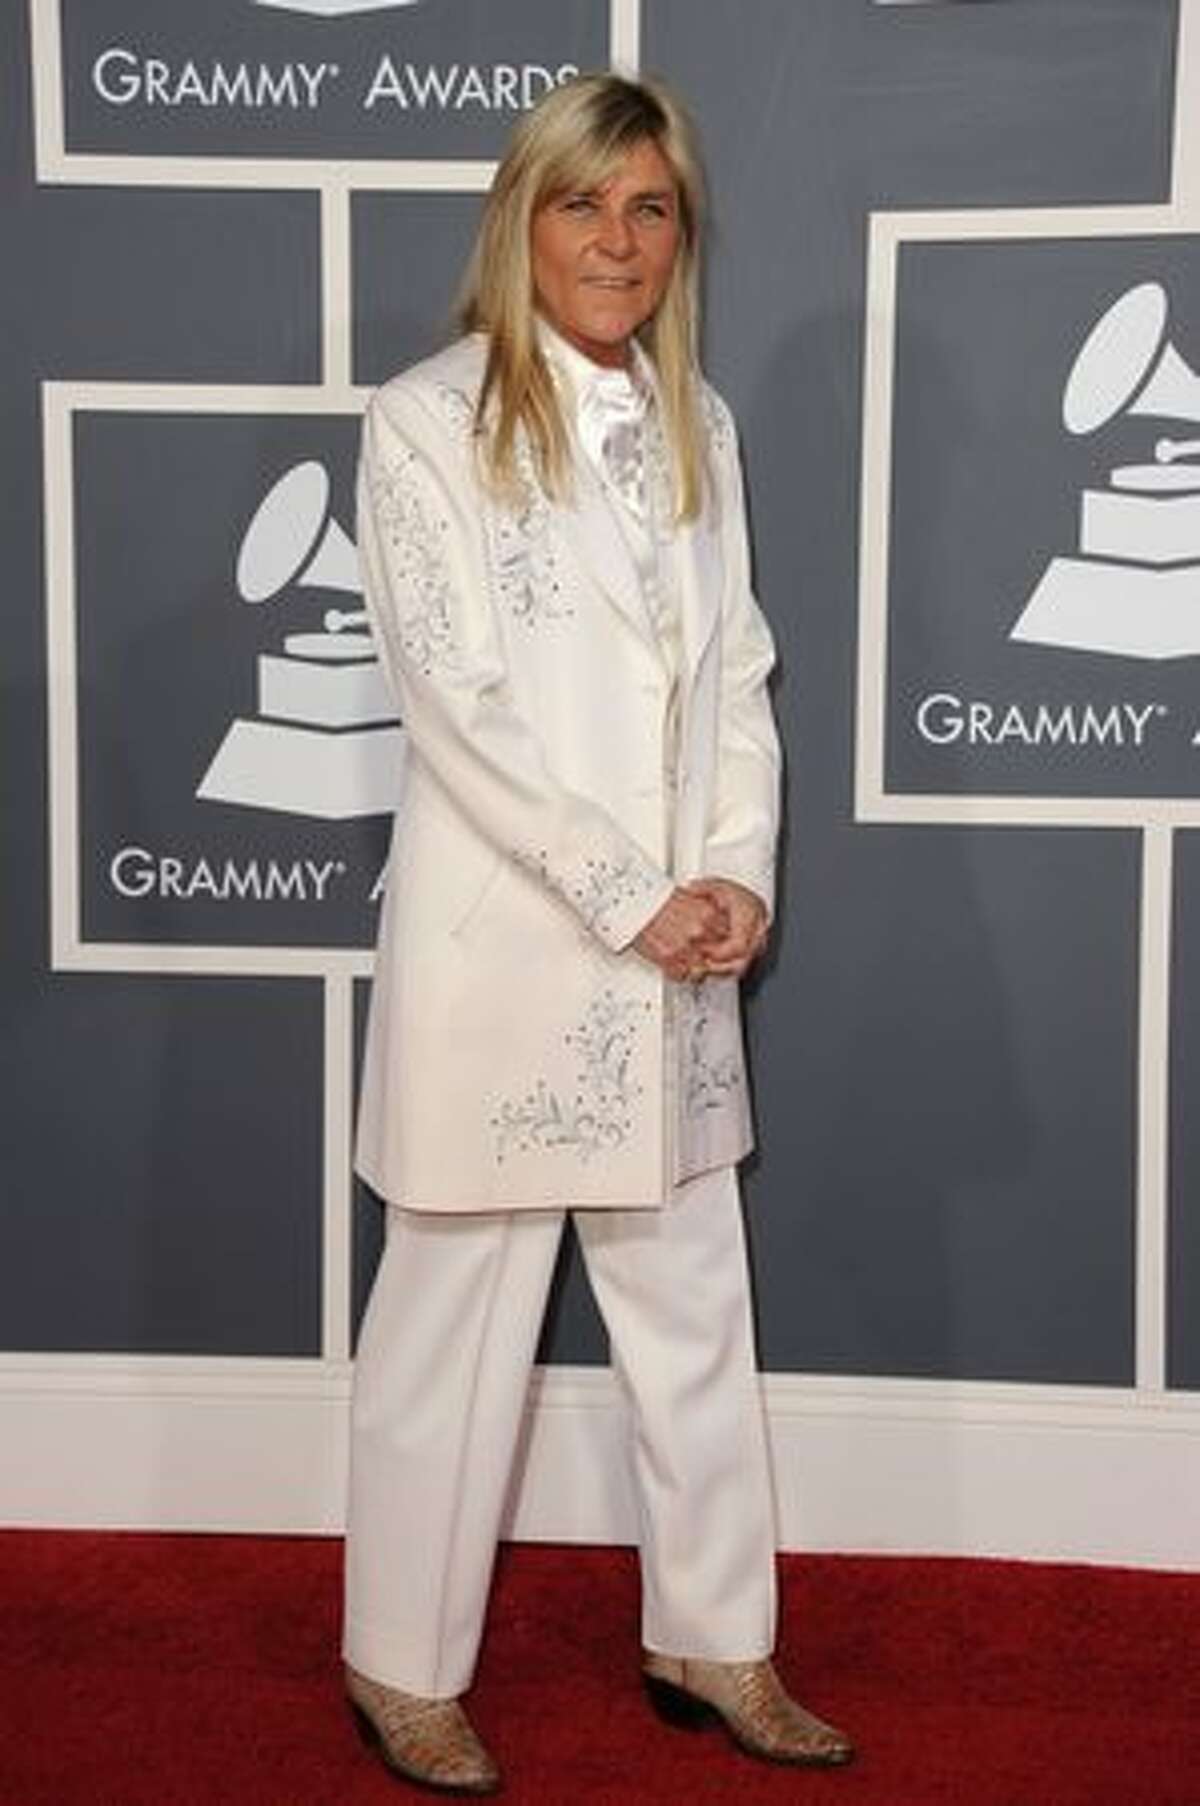 Jett Williams arrives at The 53rd Annual GRAMMY Awards held at Staples Center in Los Angeles, California.